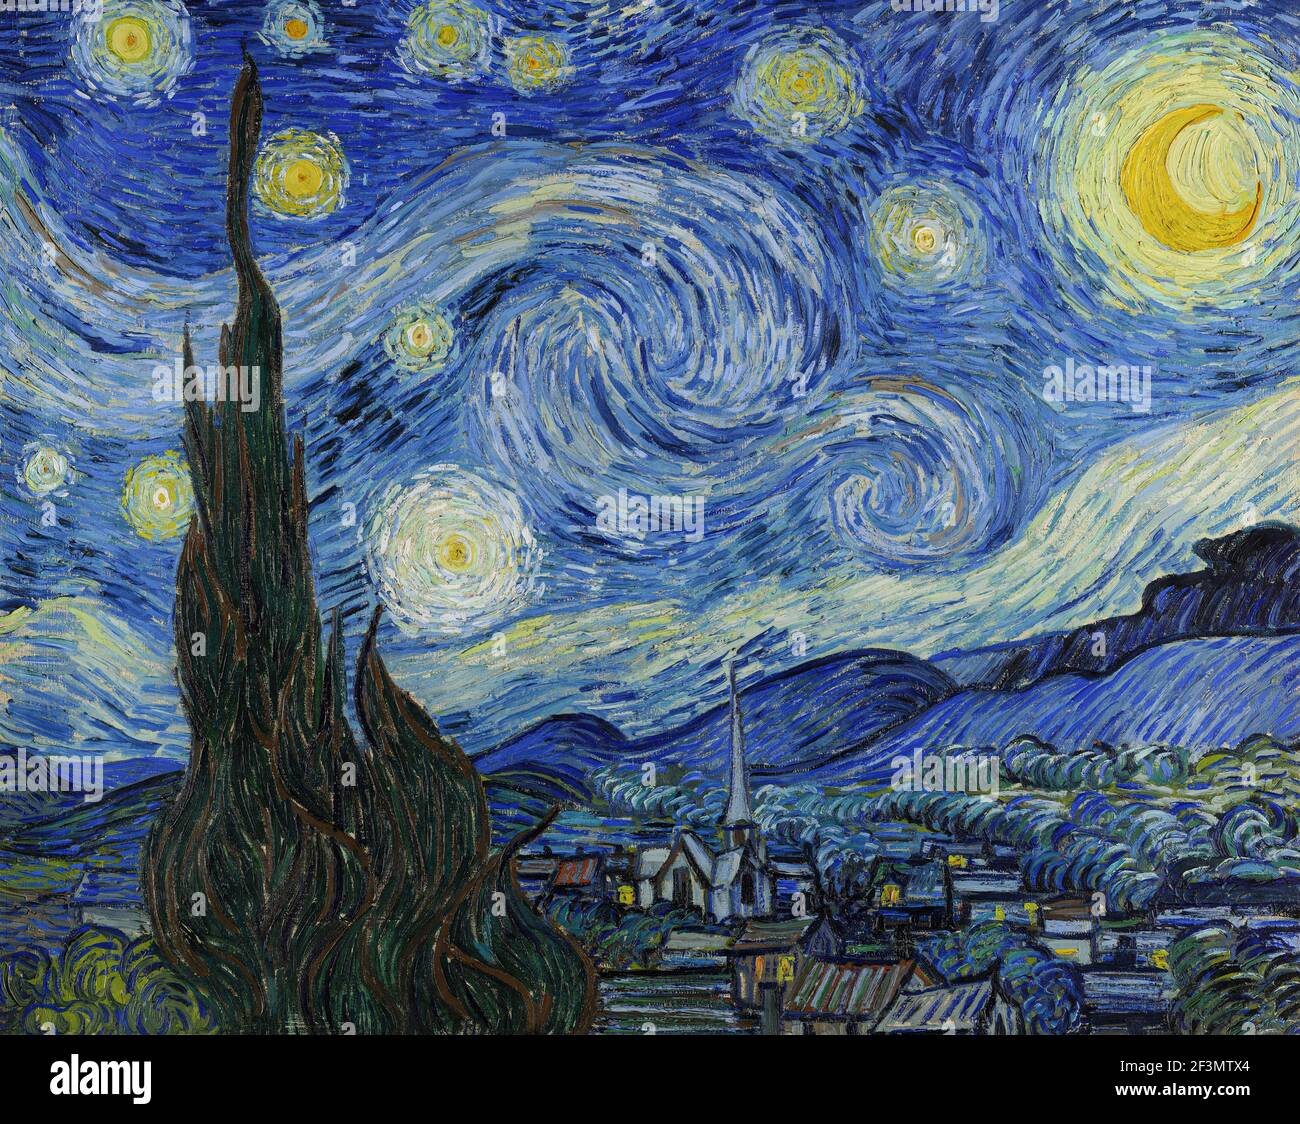 Vincent van Gogh, (1853-1890) The Starry Night, 1889, oil on canvas. Museum of Modern Art, New York City. Stock Photo